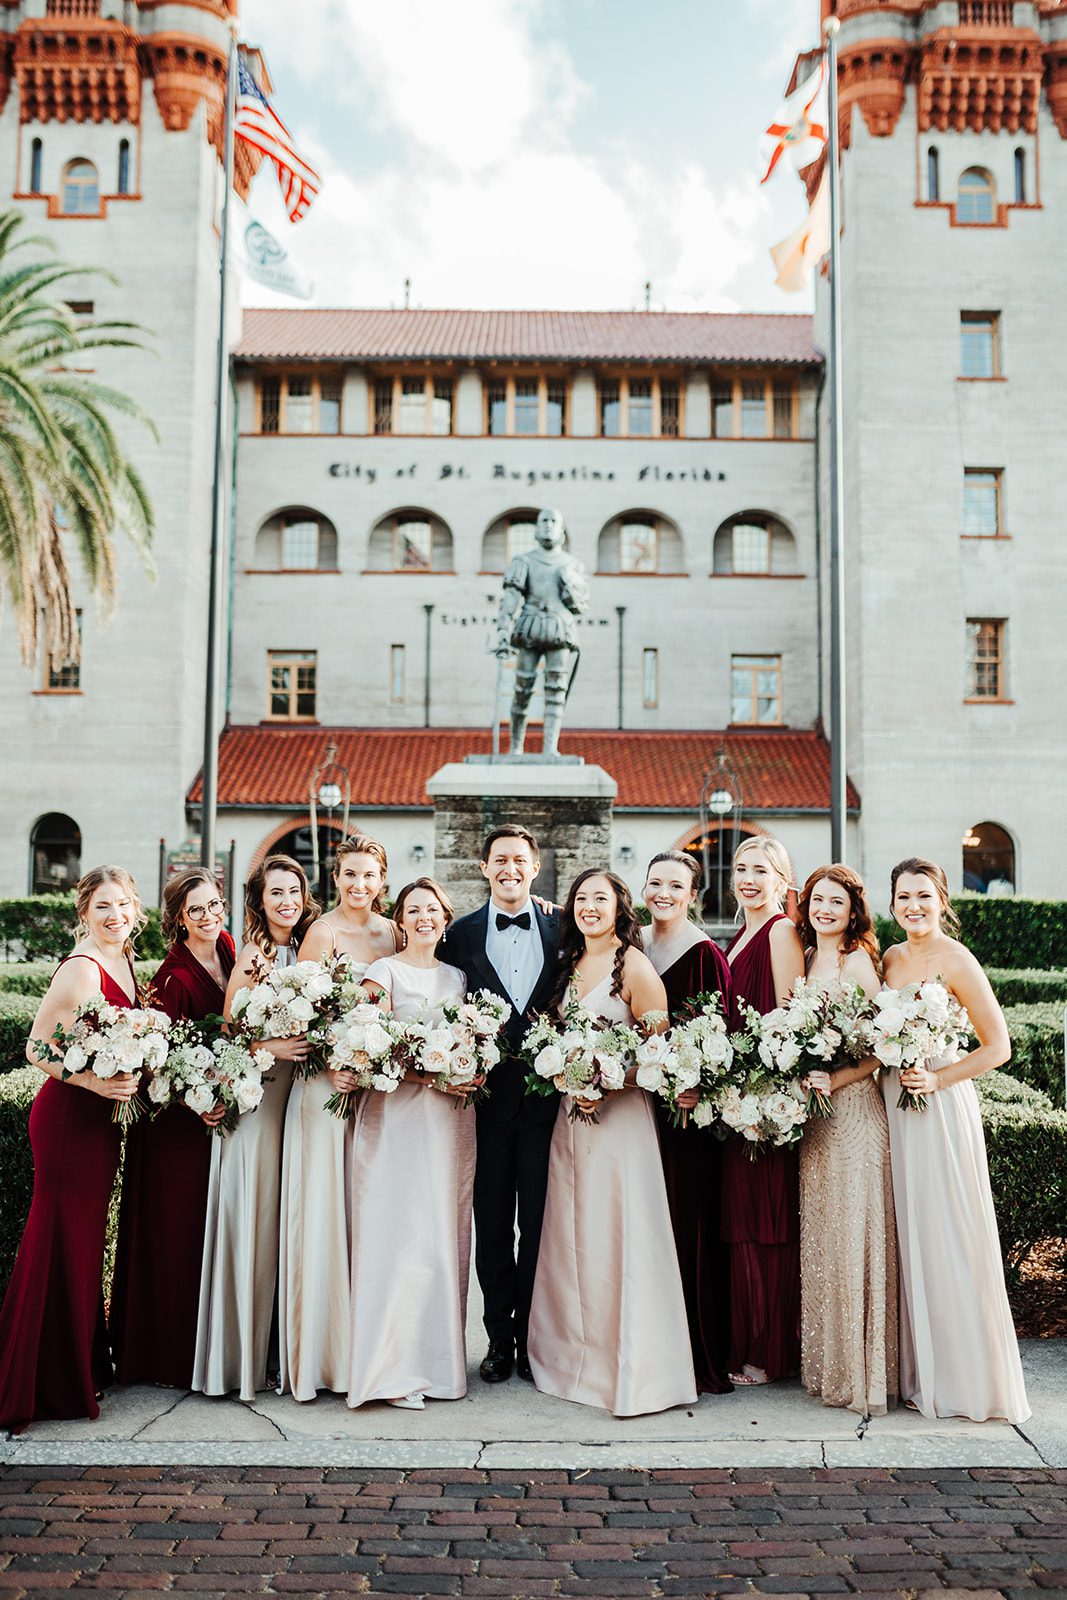 How To Choose Your Wedding Colors - Lightner Museum in St